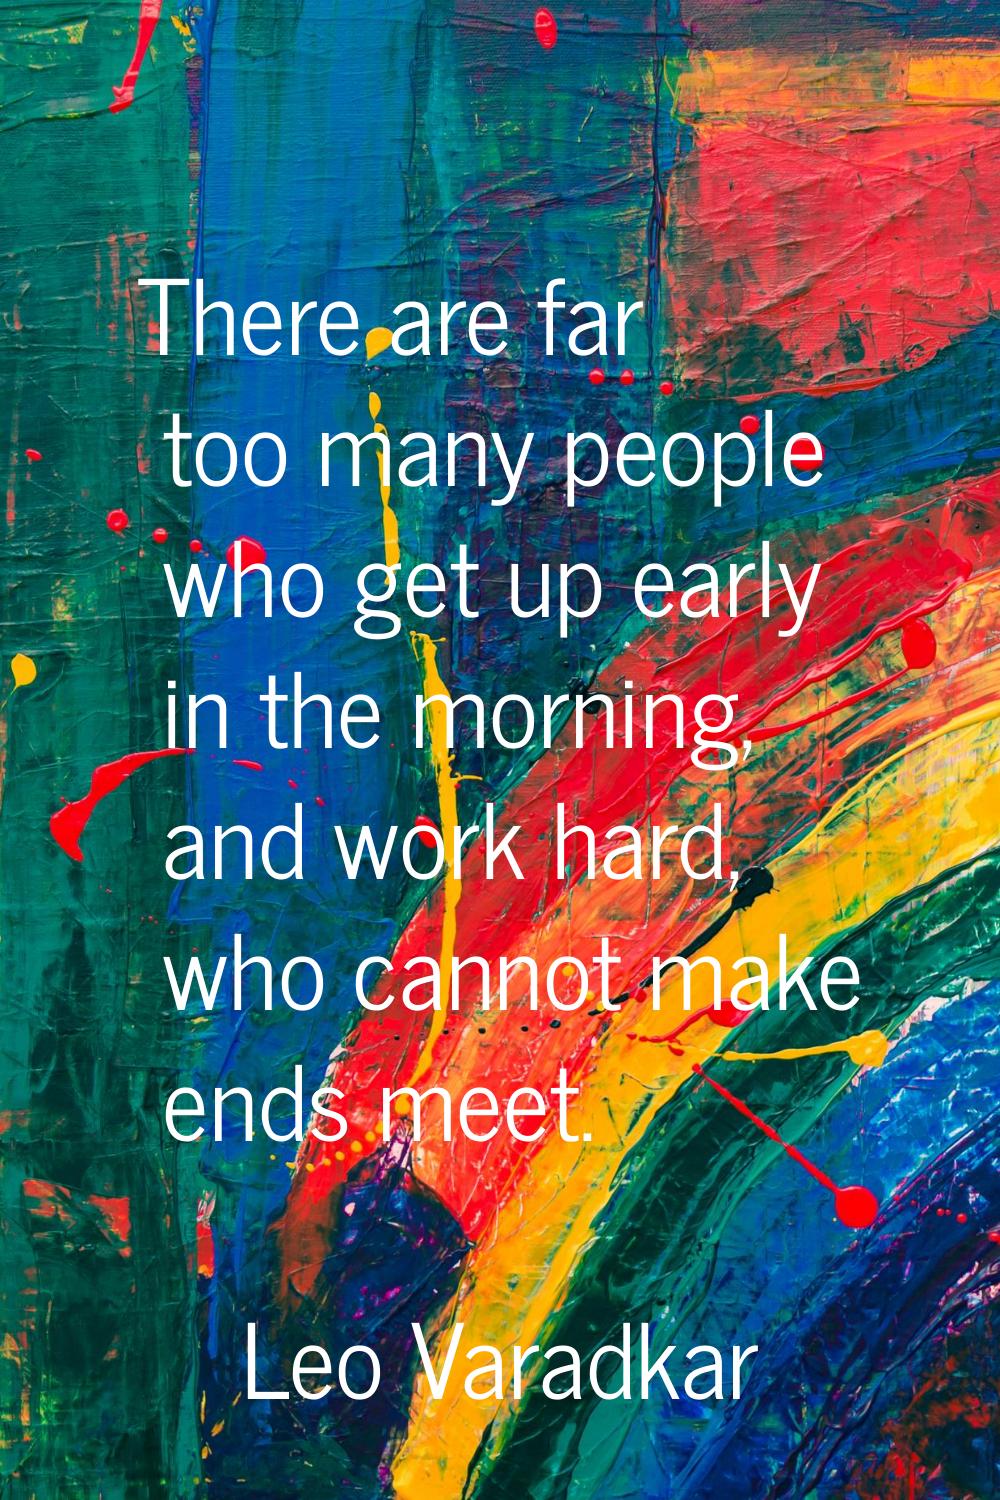 There are far too many people who get up early in the morning, and work hard, who cannot make ends 